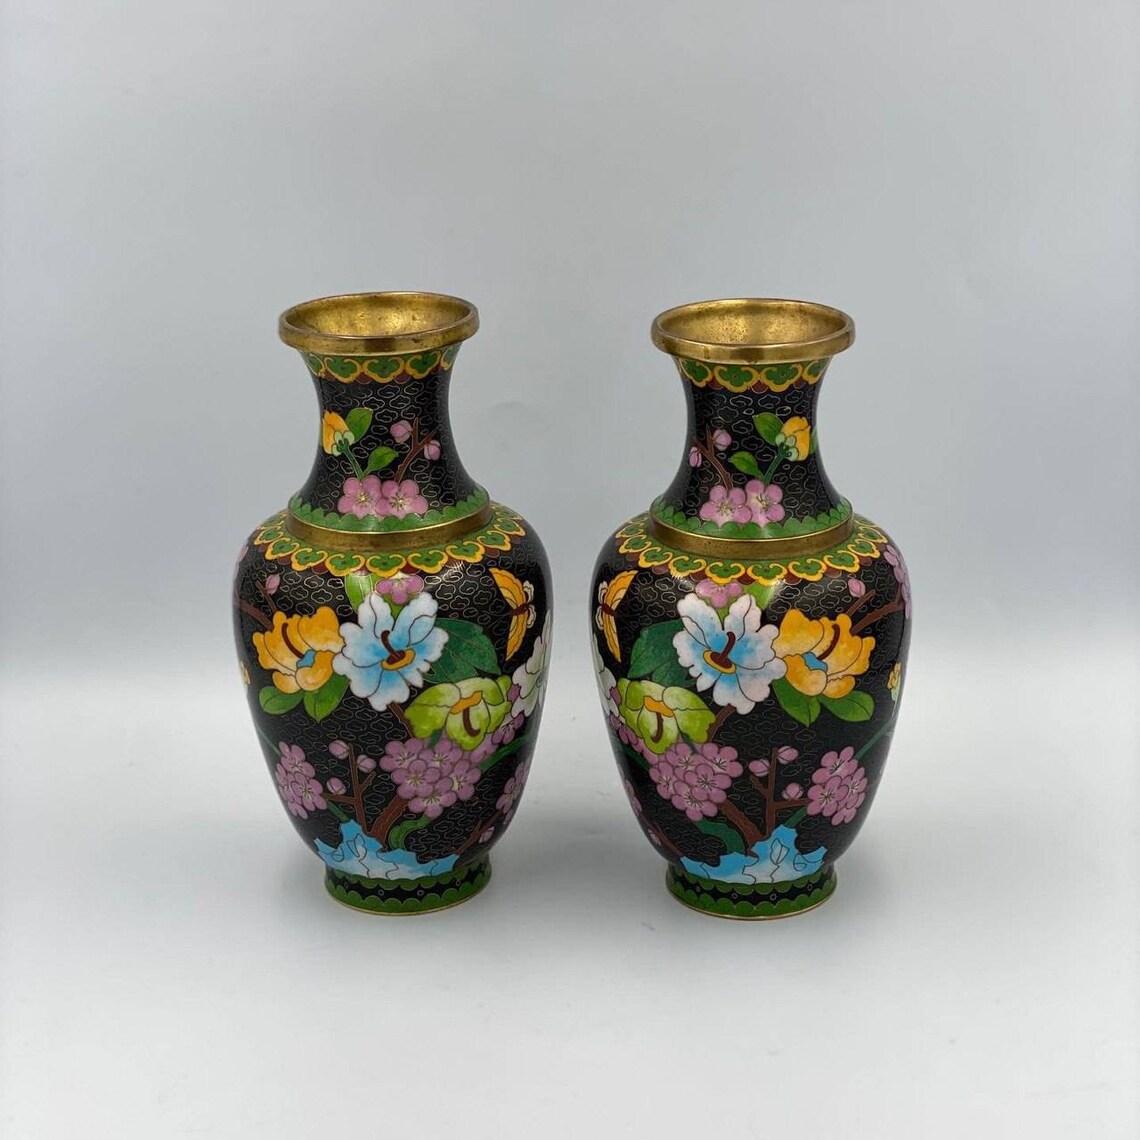 Cloisonne is a technique for creating cloisonné enamel on metal objects. The name of the technique appeared in France and comes from the word 